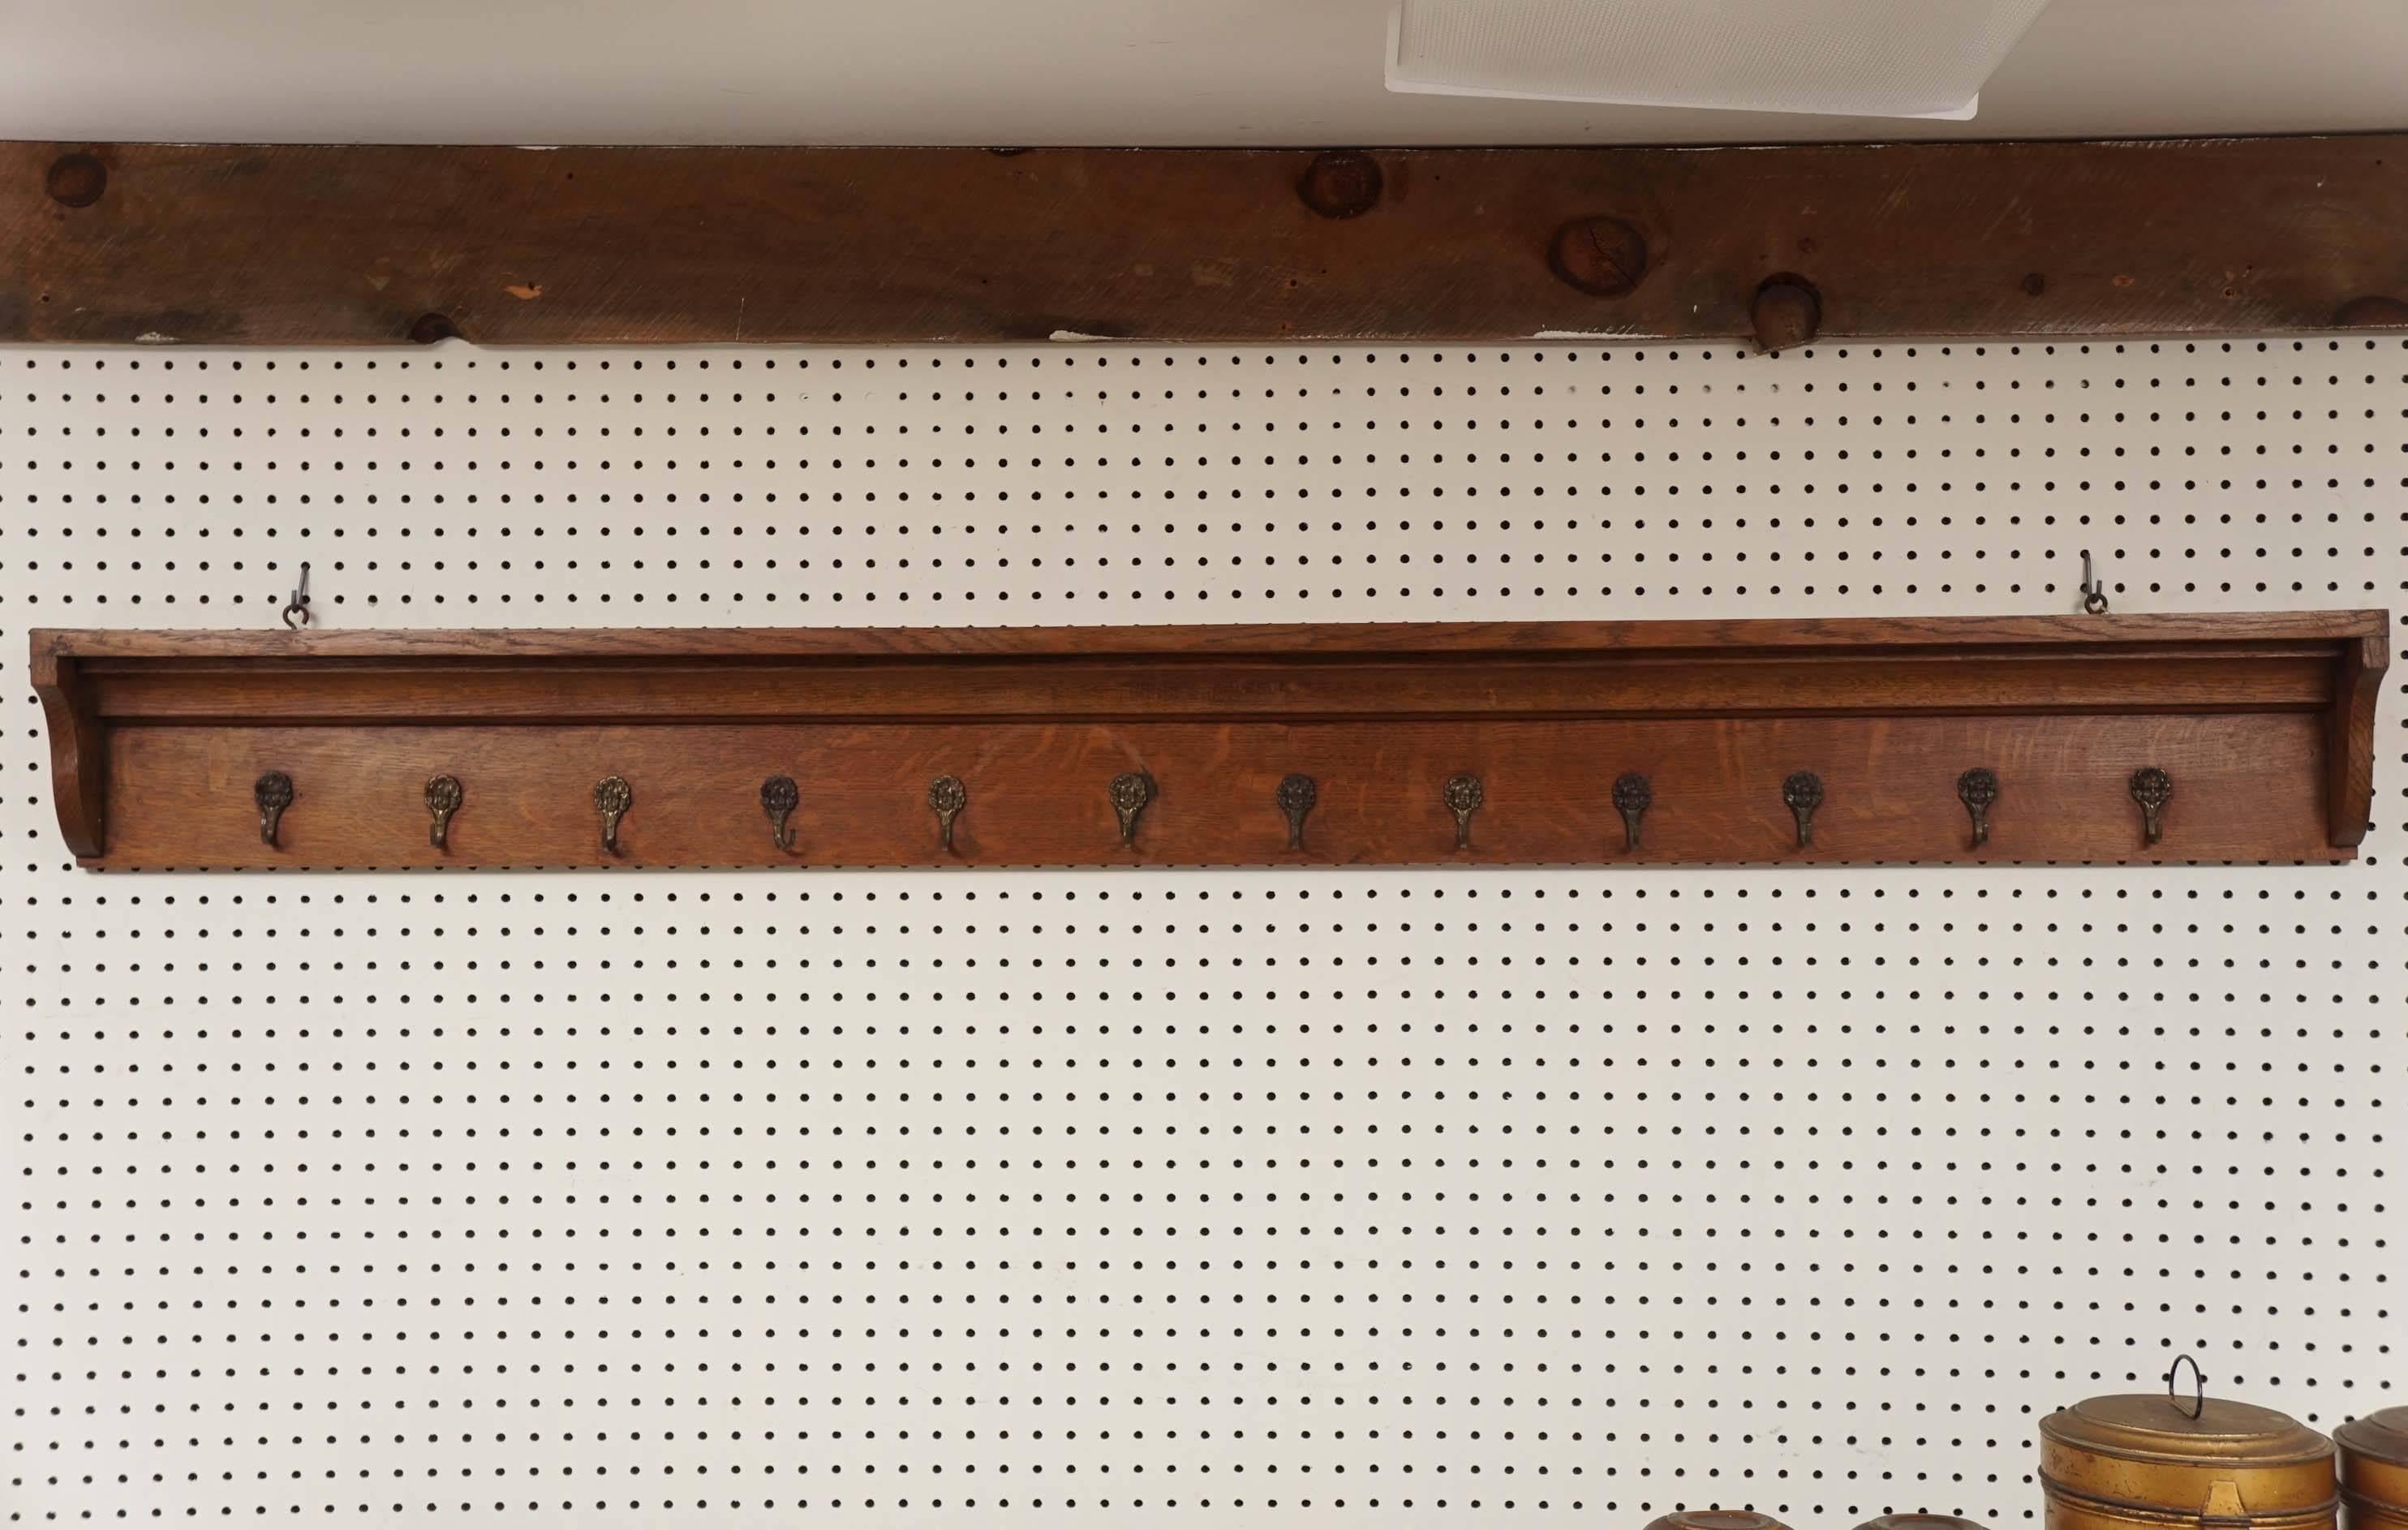 This French oak coat hooks has all their original hooks and a small shelf on top. How nice would this be in a mud room or children's room. A rich patina. There are other shelves with hooks at Painted Porch, as well.